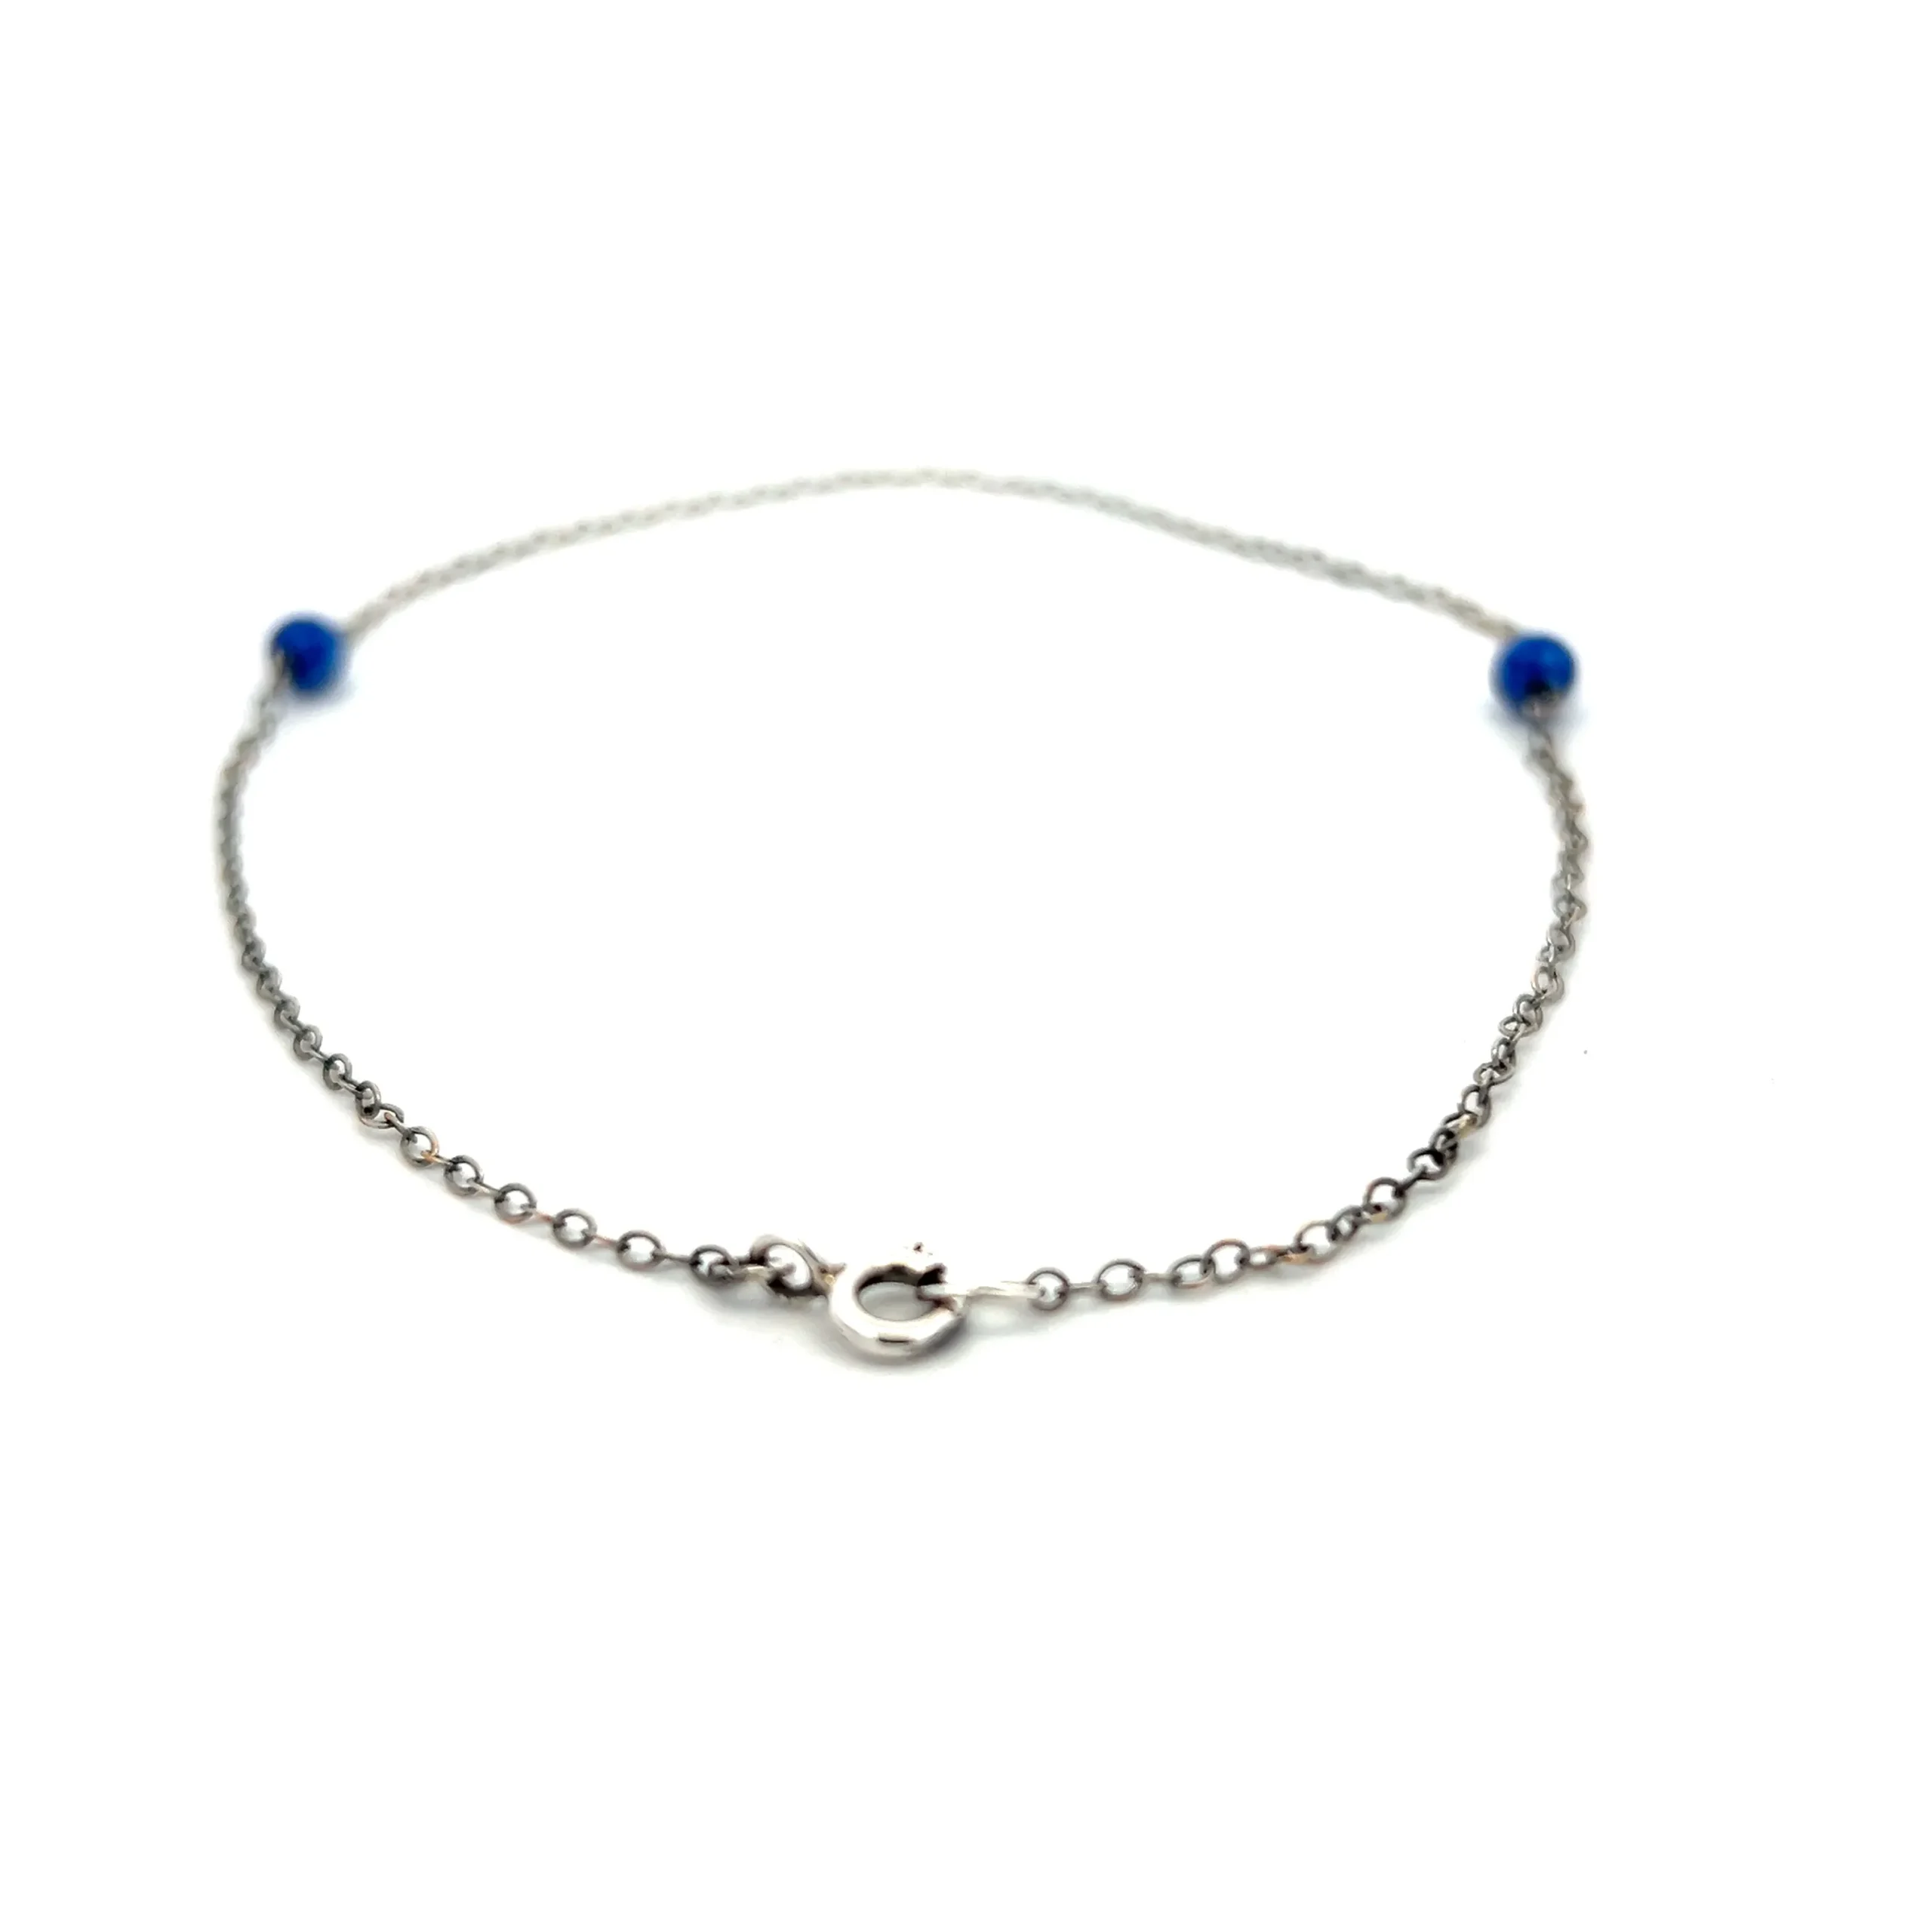 One estate sterling silver anklet with 2 round cabochon lapis lazuli beads measuring 4mm each on a 9.5" anklet. spring ring clasp.